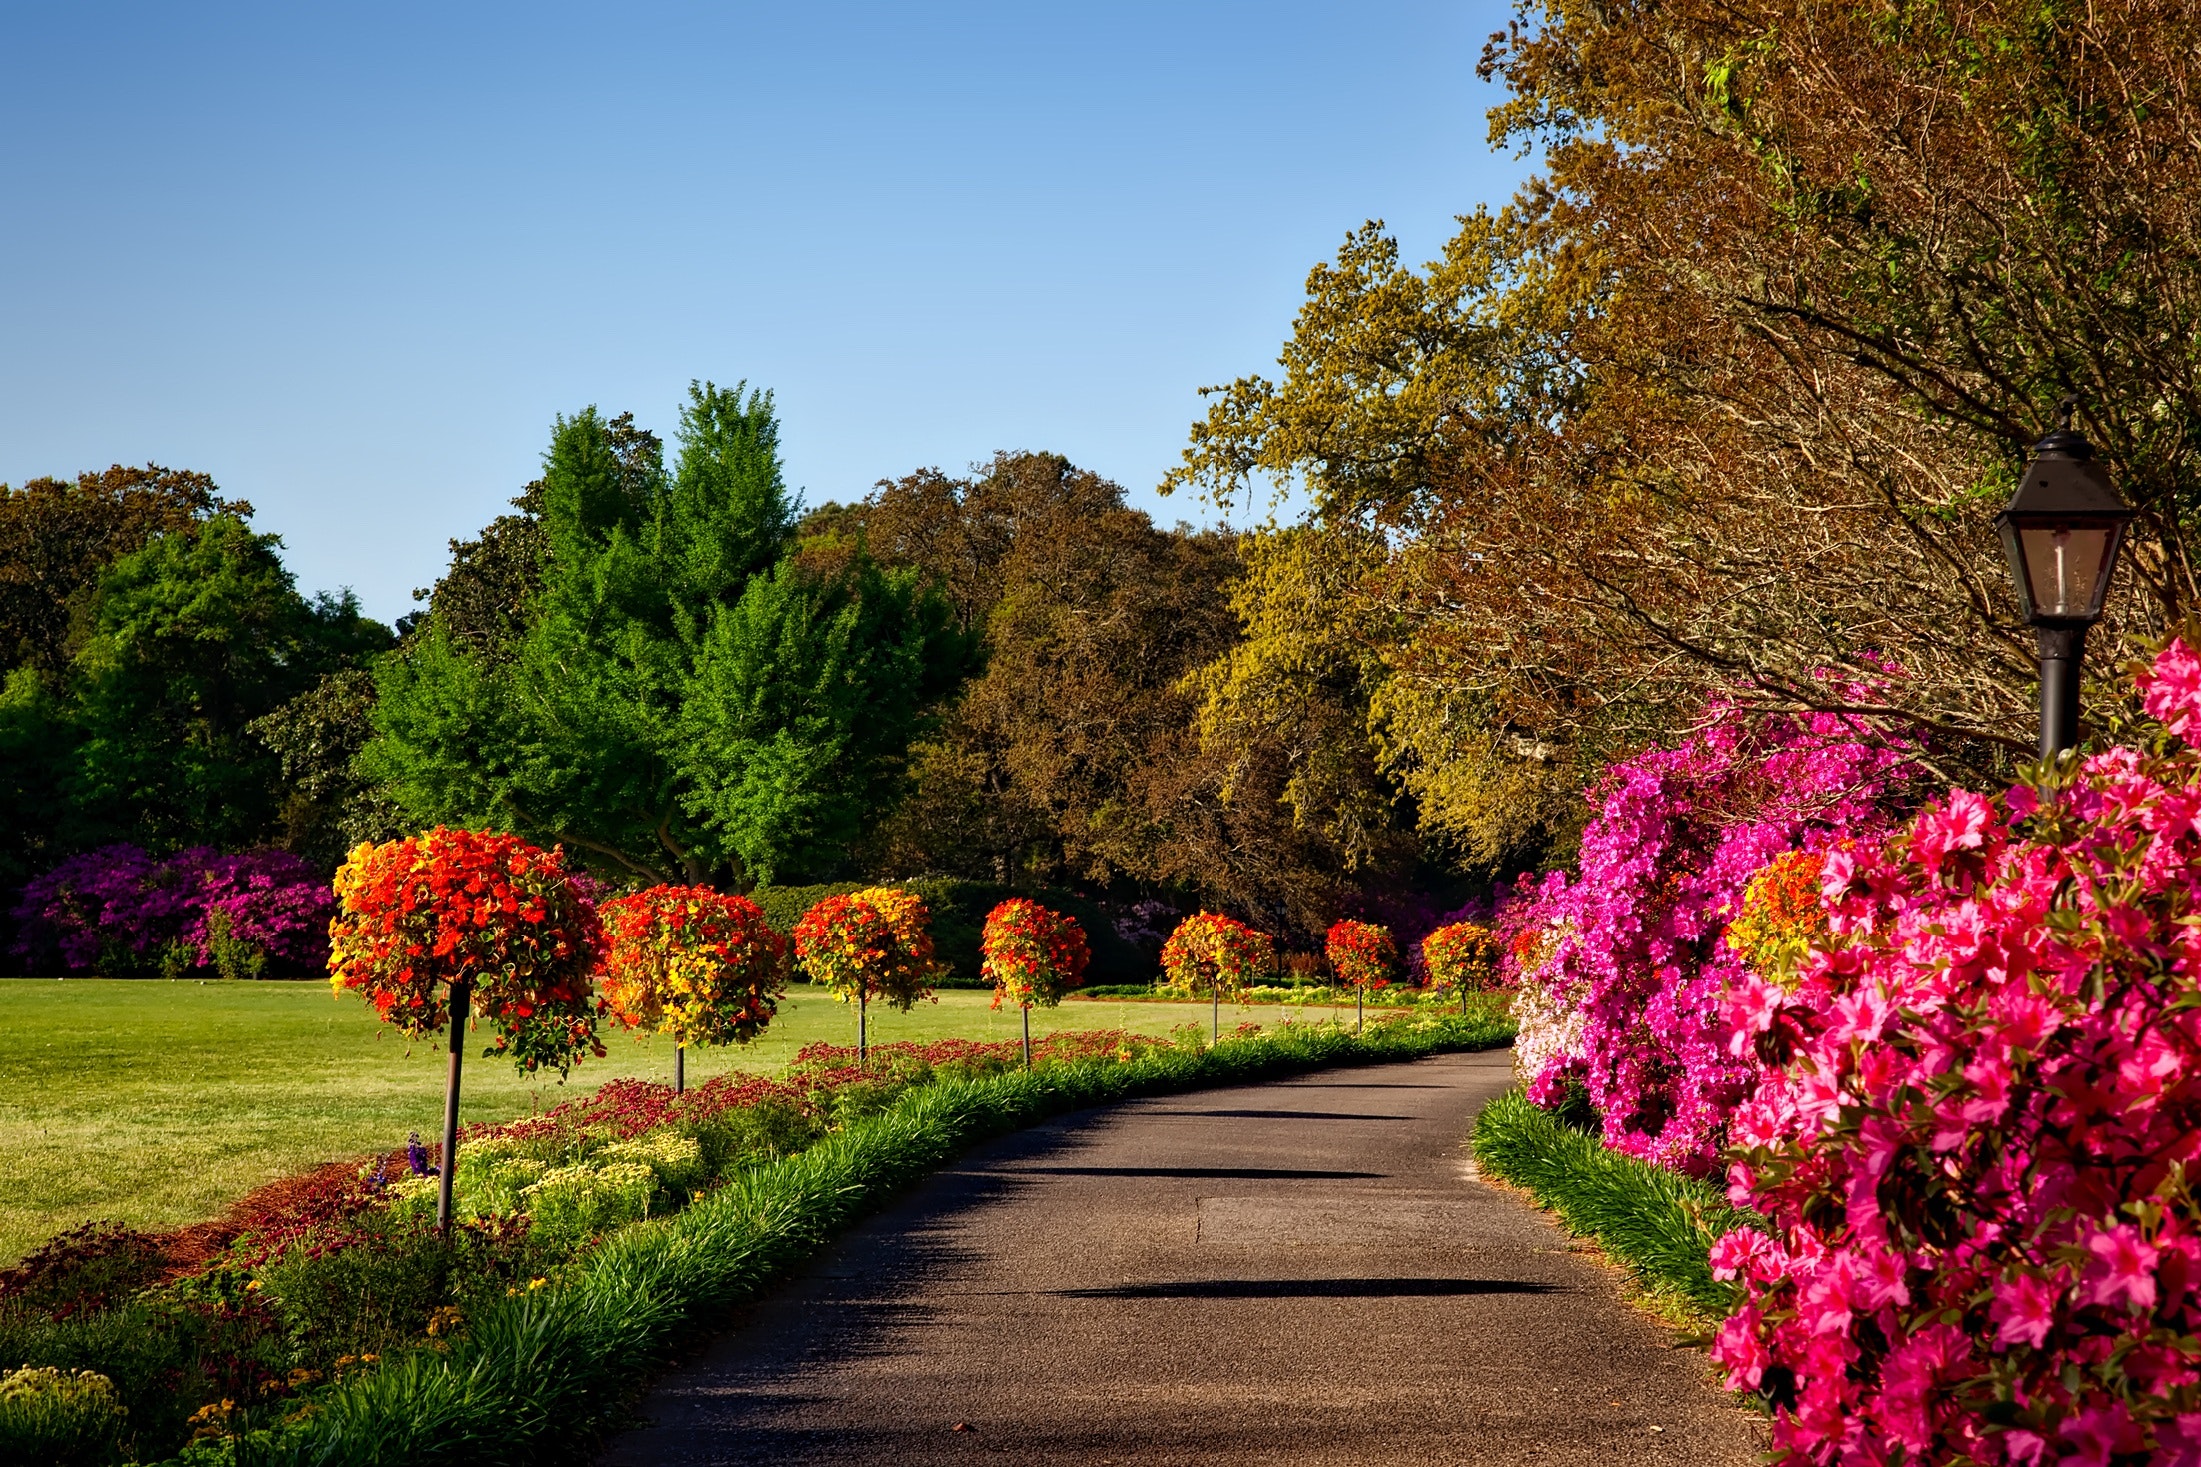 lush park with a walking path and colorful flowers and trees | hudson gardens Lone Tree